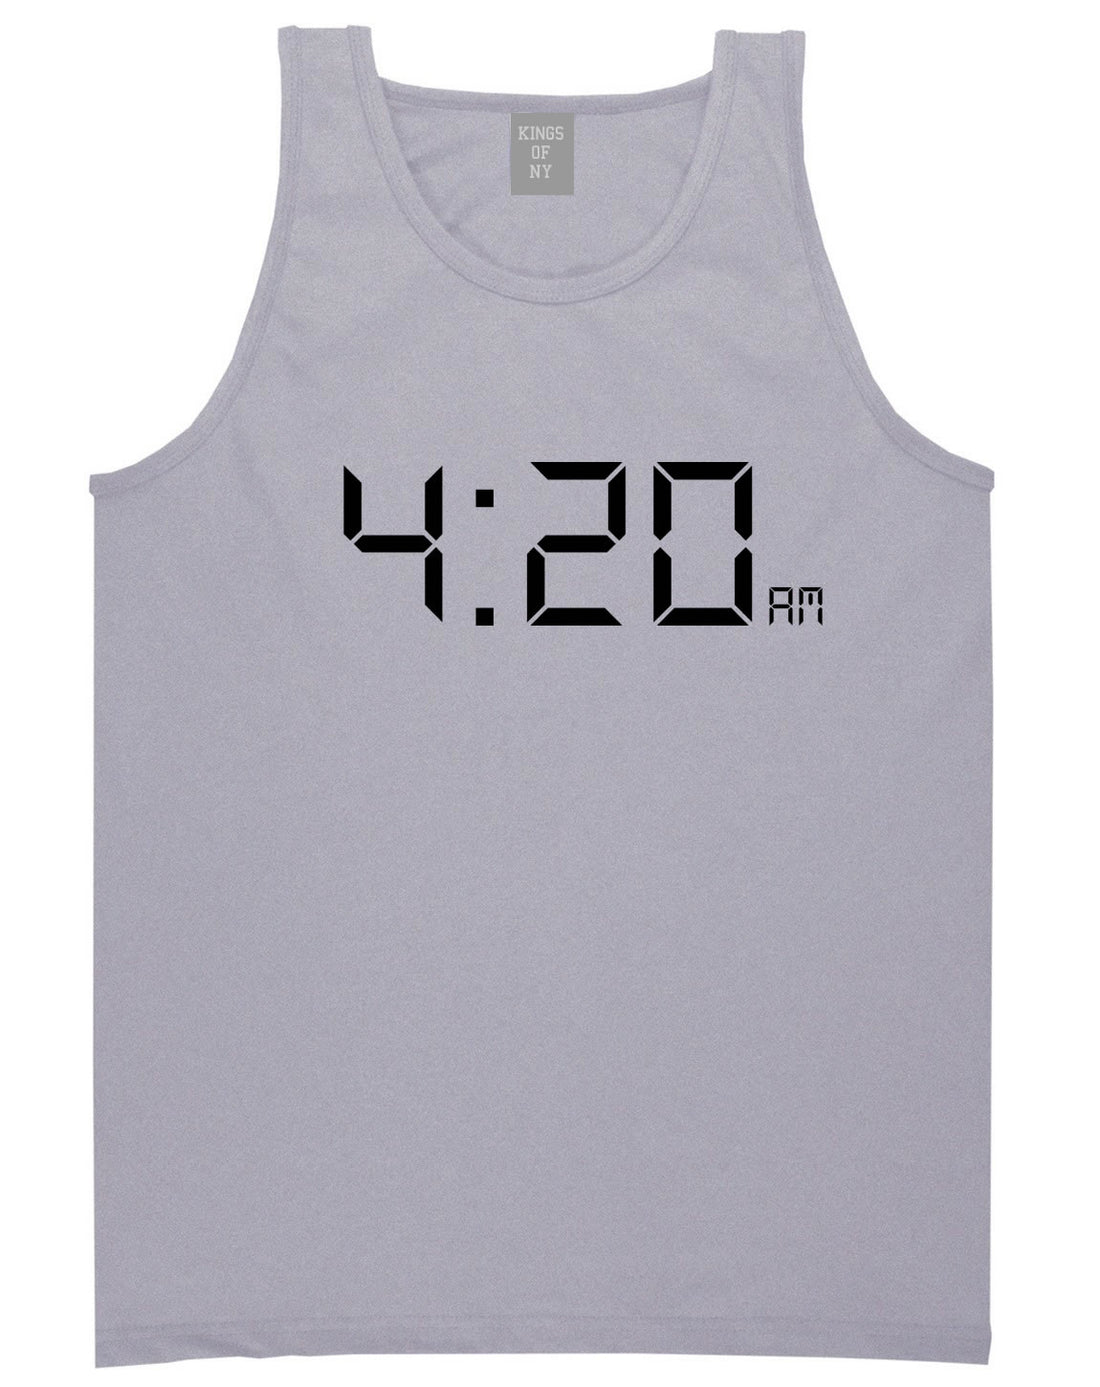 420 Time Weed Somker Tank Top in Grey By Kings Of NY